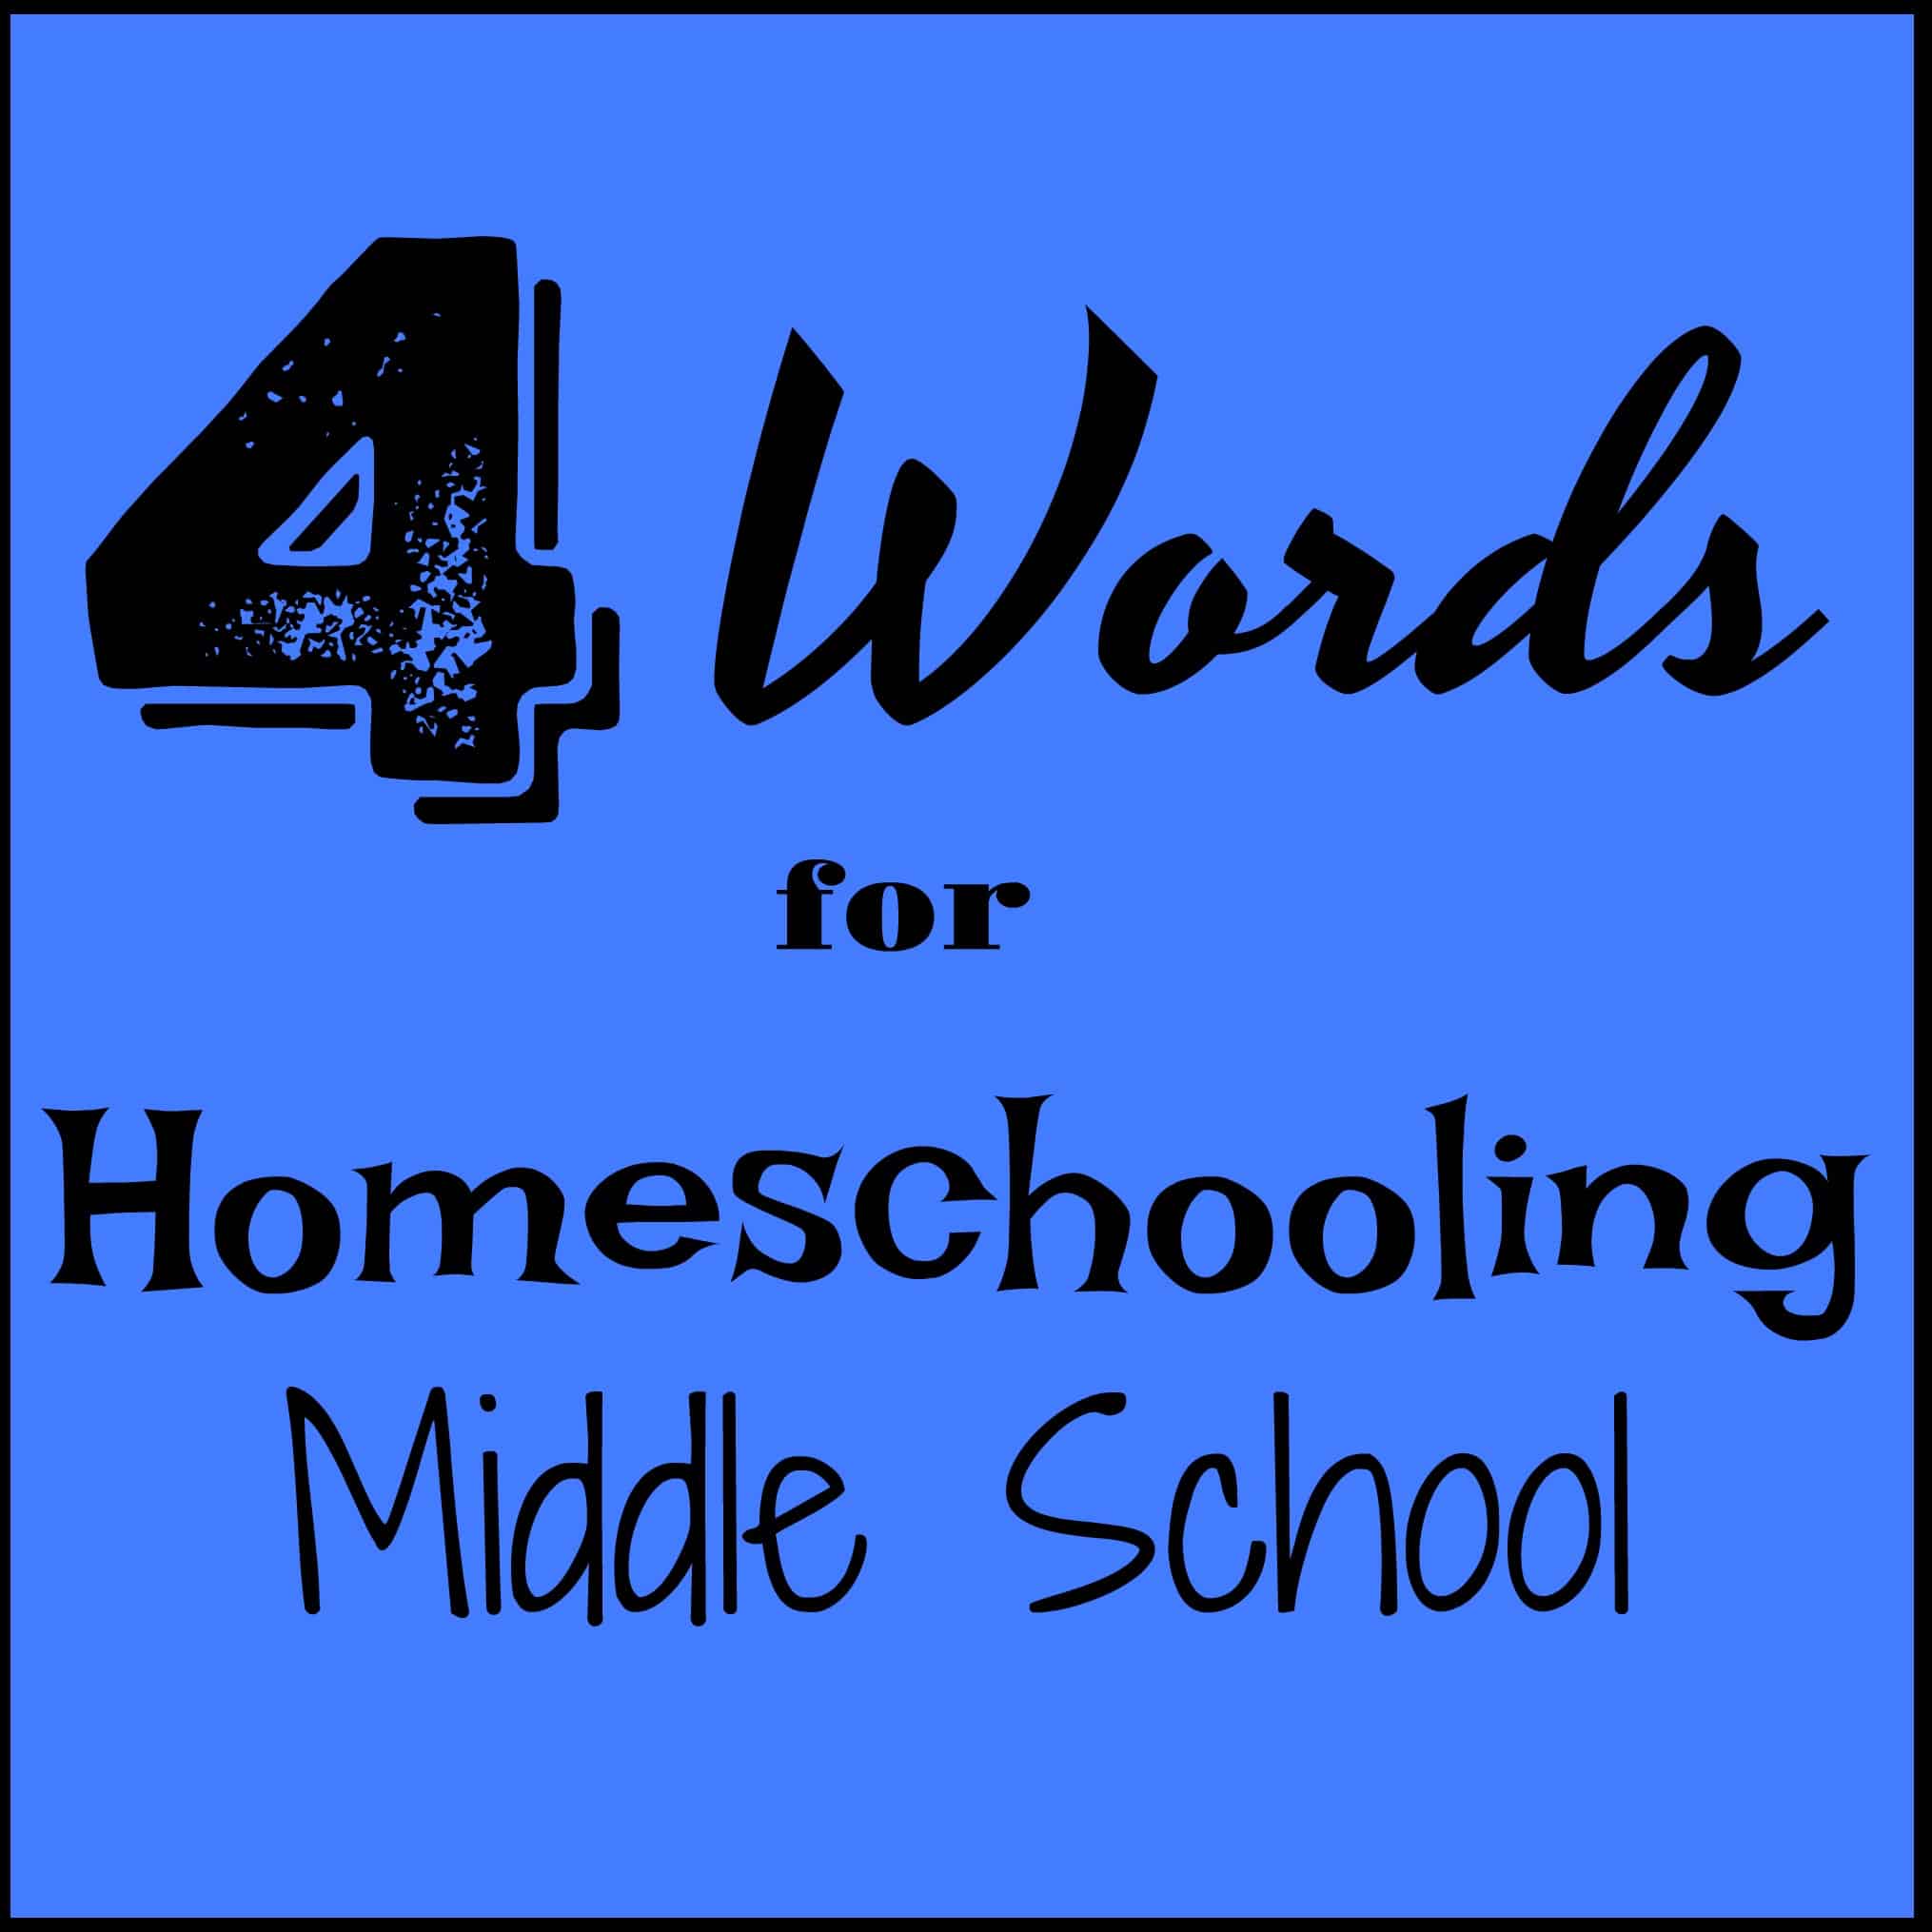 4 Words for Homeschooling Middle School